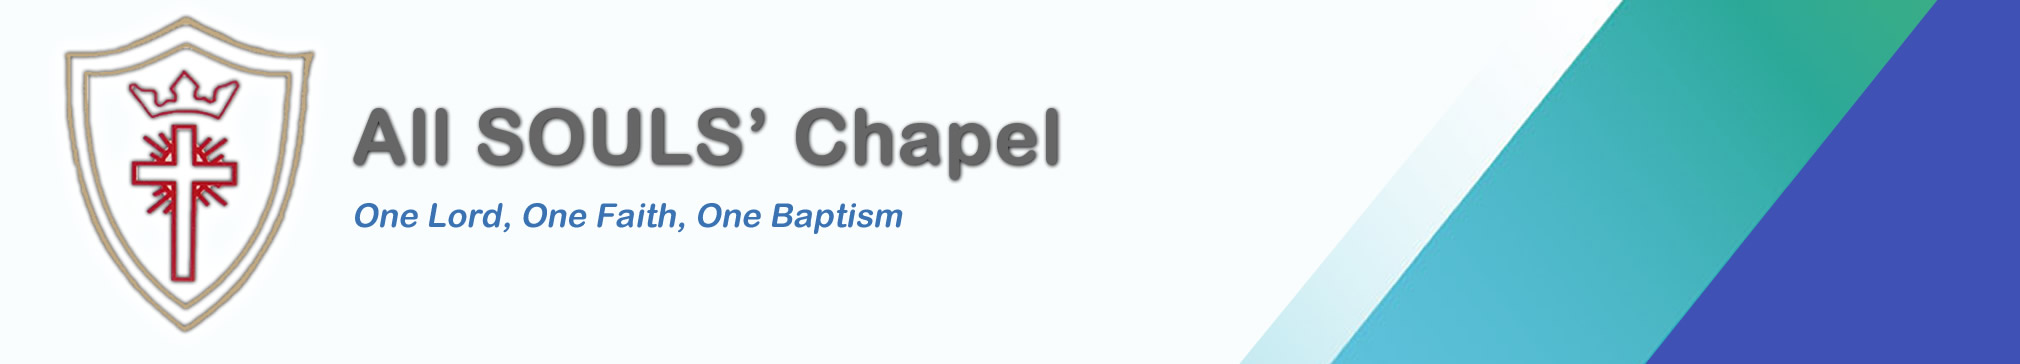 chapel chaiperson